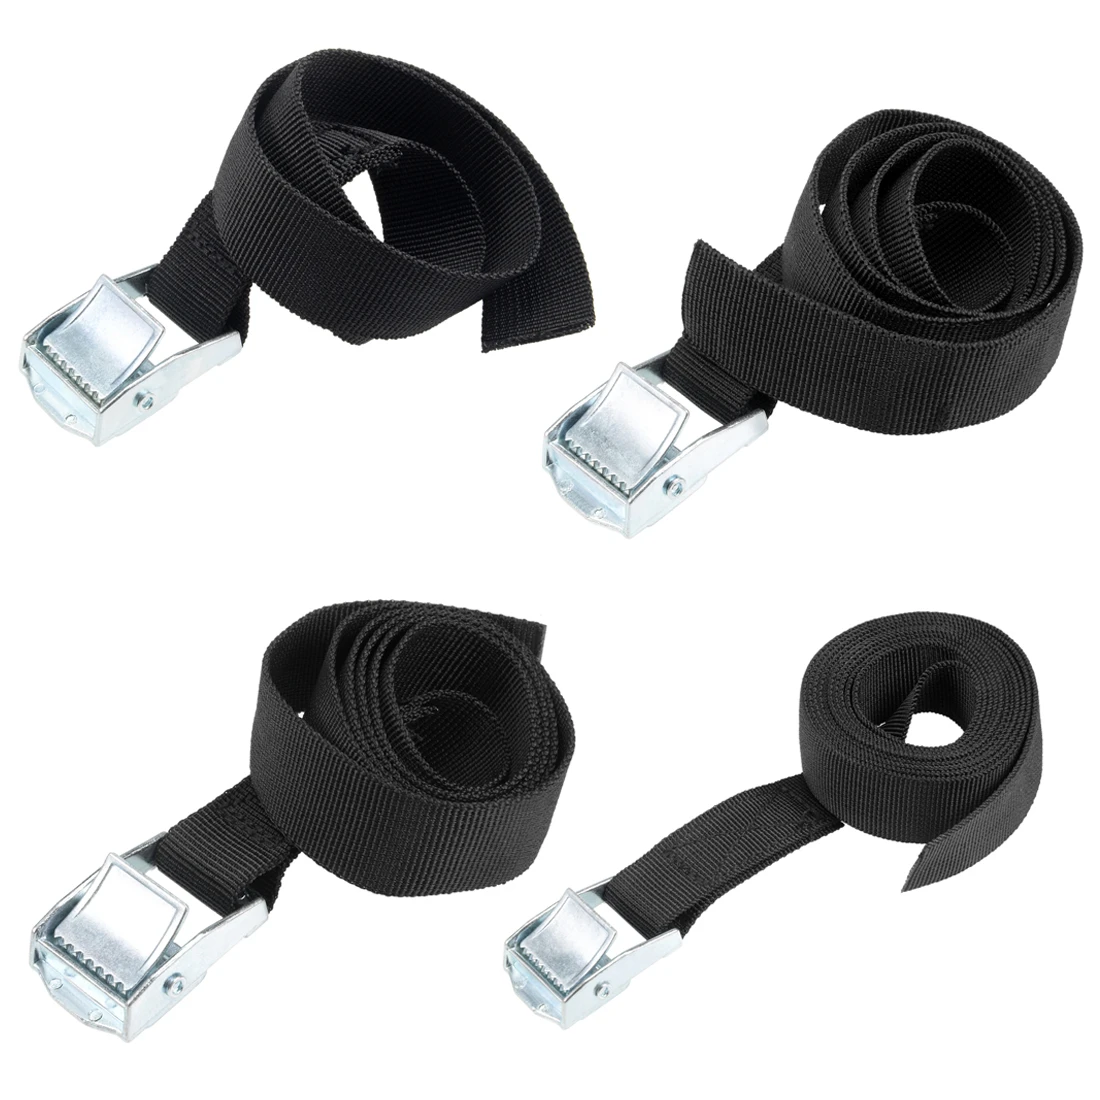 4Pcs Black uxcell 5M x 25mm Lashing Strap Cargo Tie Down Straps Cam Lock Buckle Up to 250Kg 